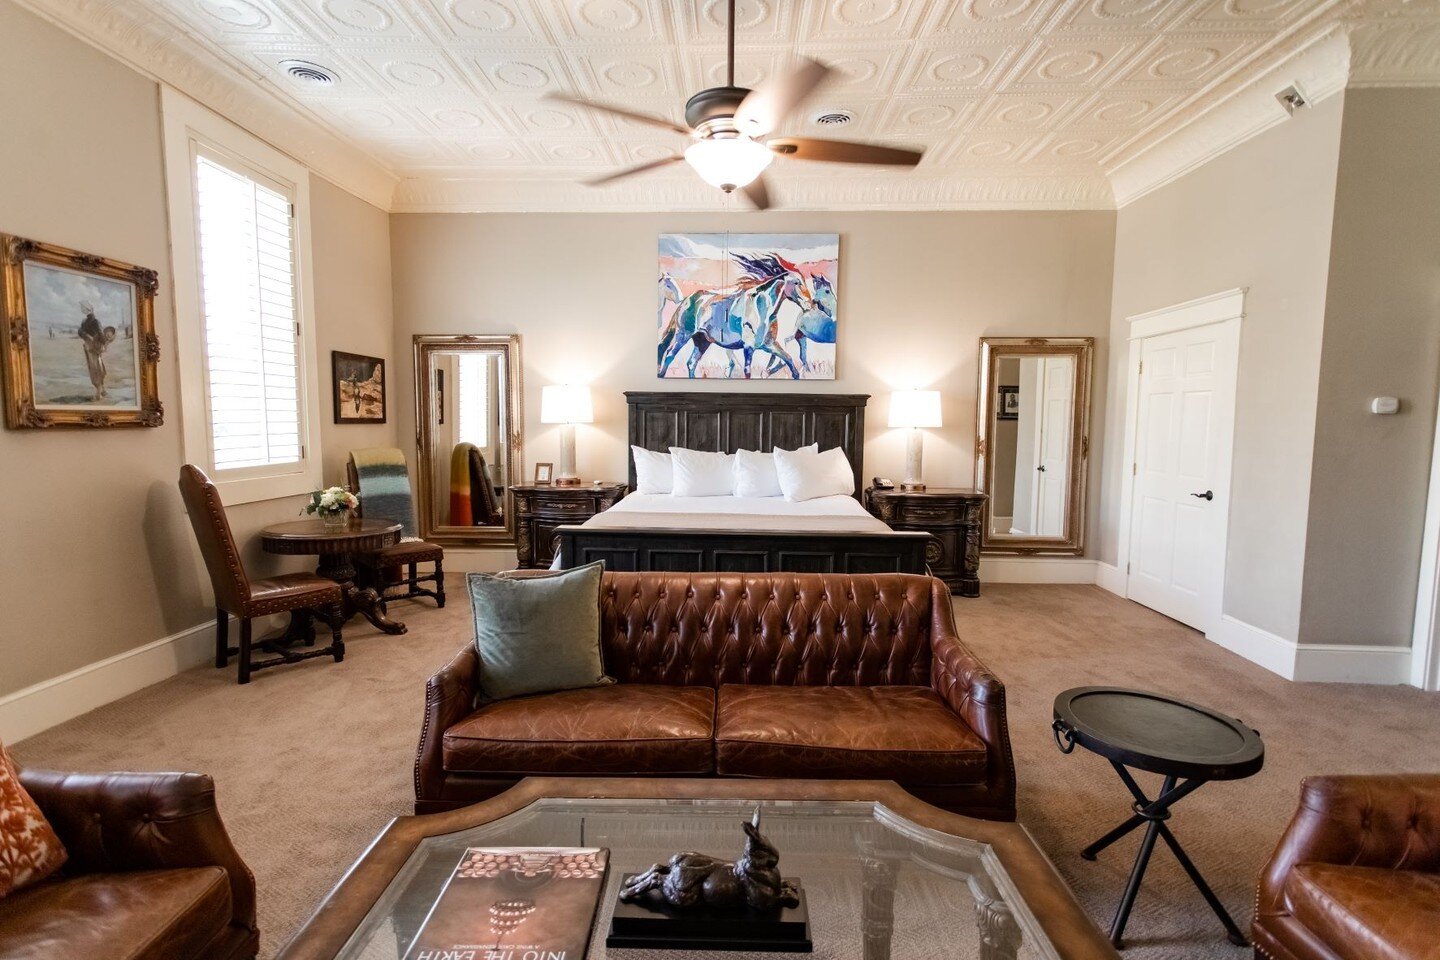 Welcome to the Owner's Suite. 
Our goal in this room is to make you feel at home, and feel the history of our building. 
Hand picked artwork, books of all ranges in our hand made bookcases, and a soaking tub in the bathroom. 
Who would want to leave?